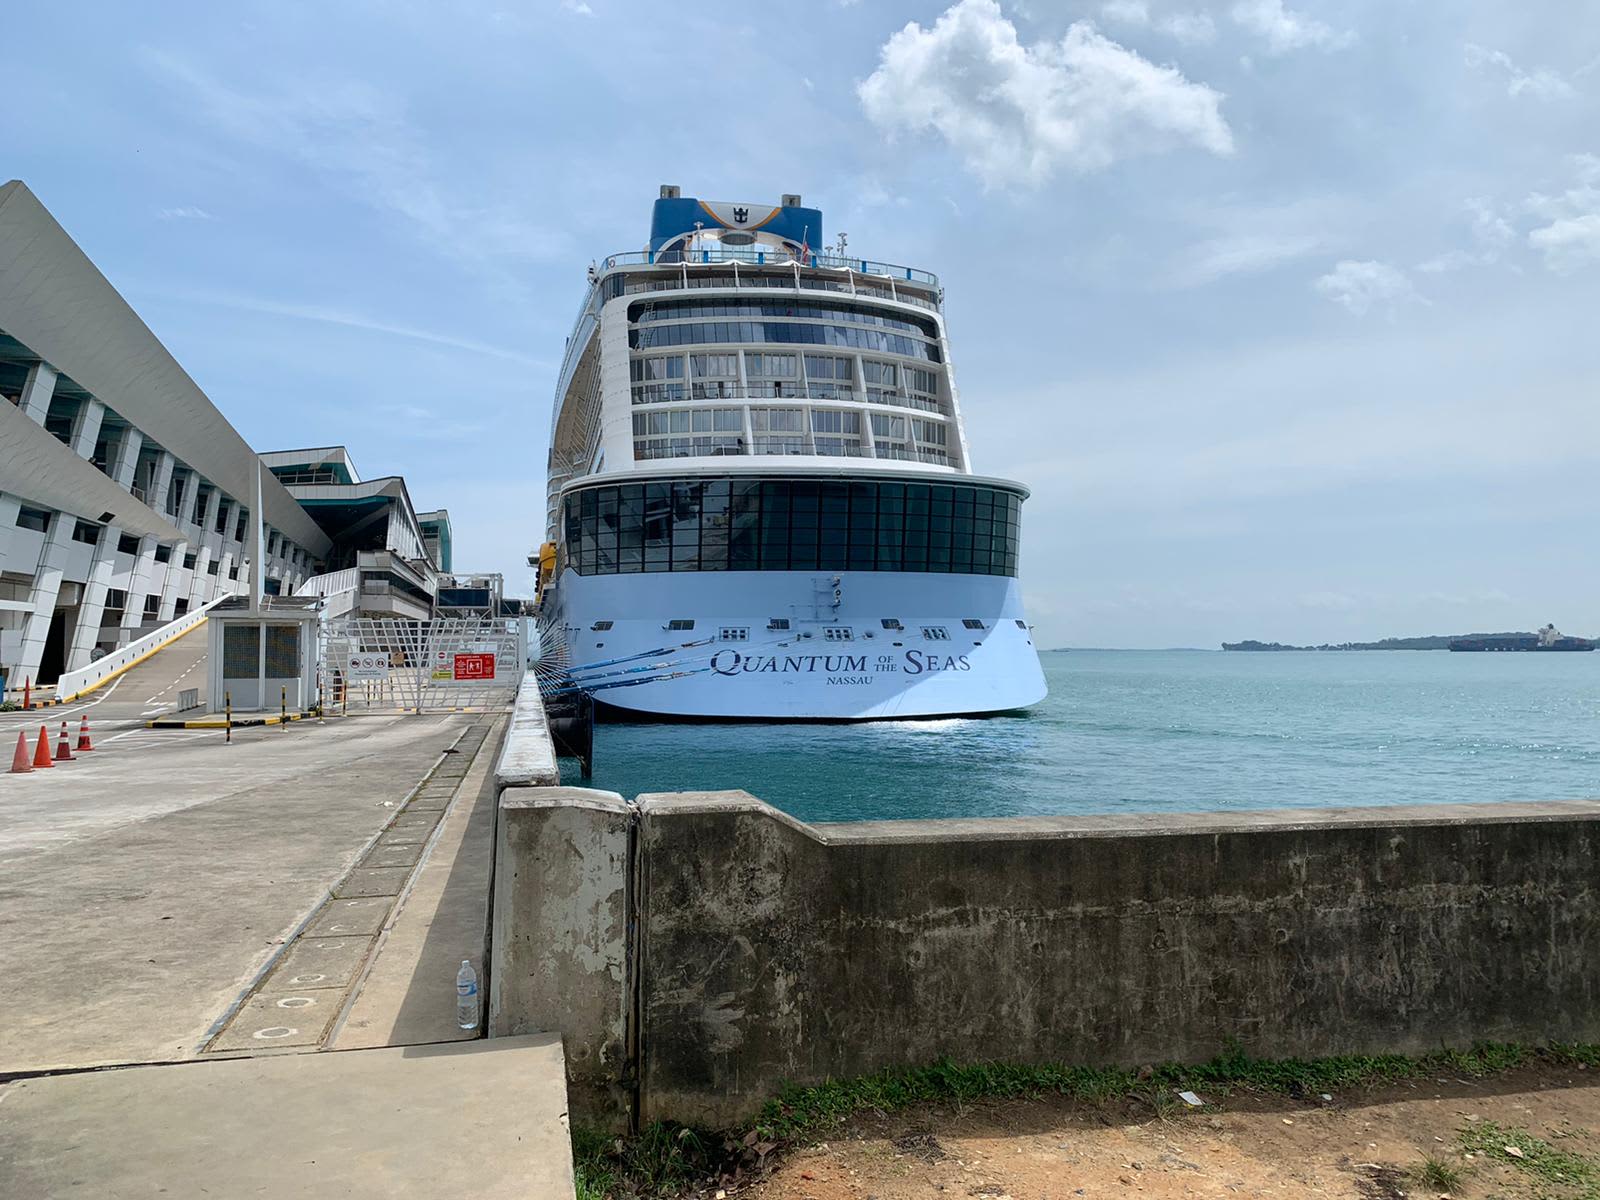 Covid-19 assessments for passenger on a Royal Caribbean cruise in Singapore